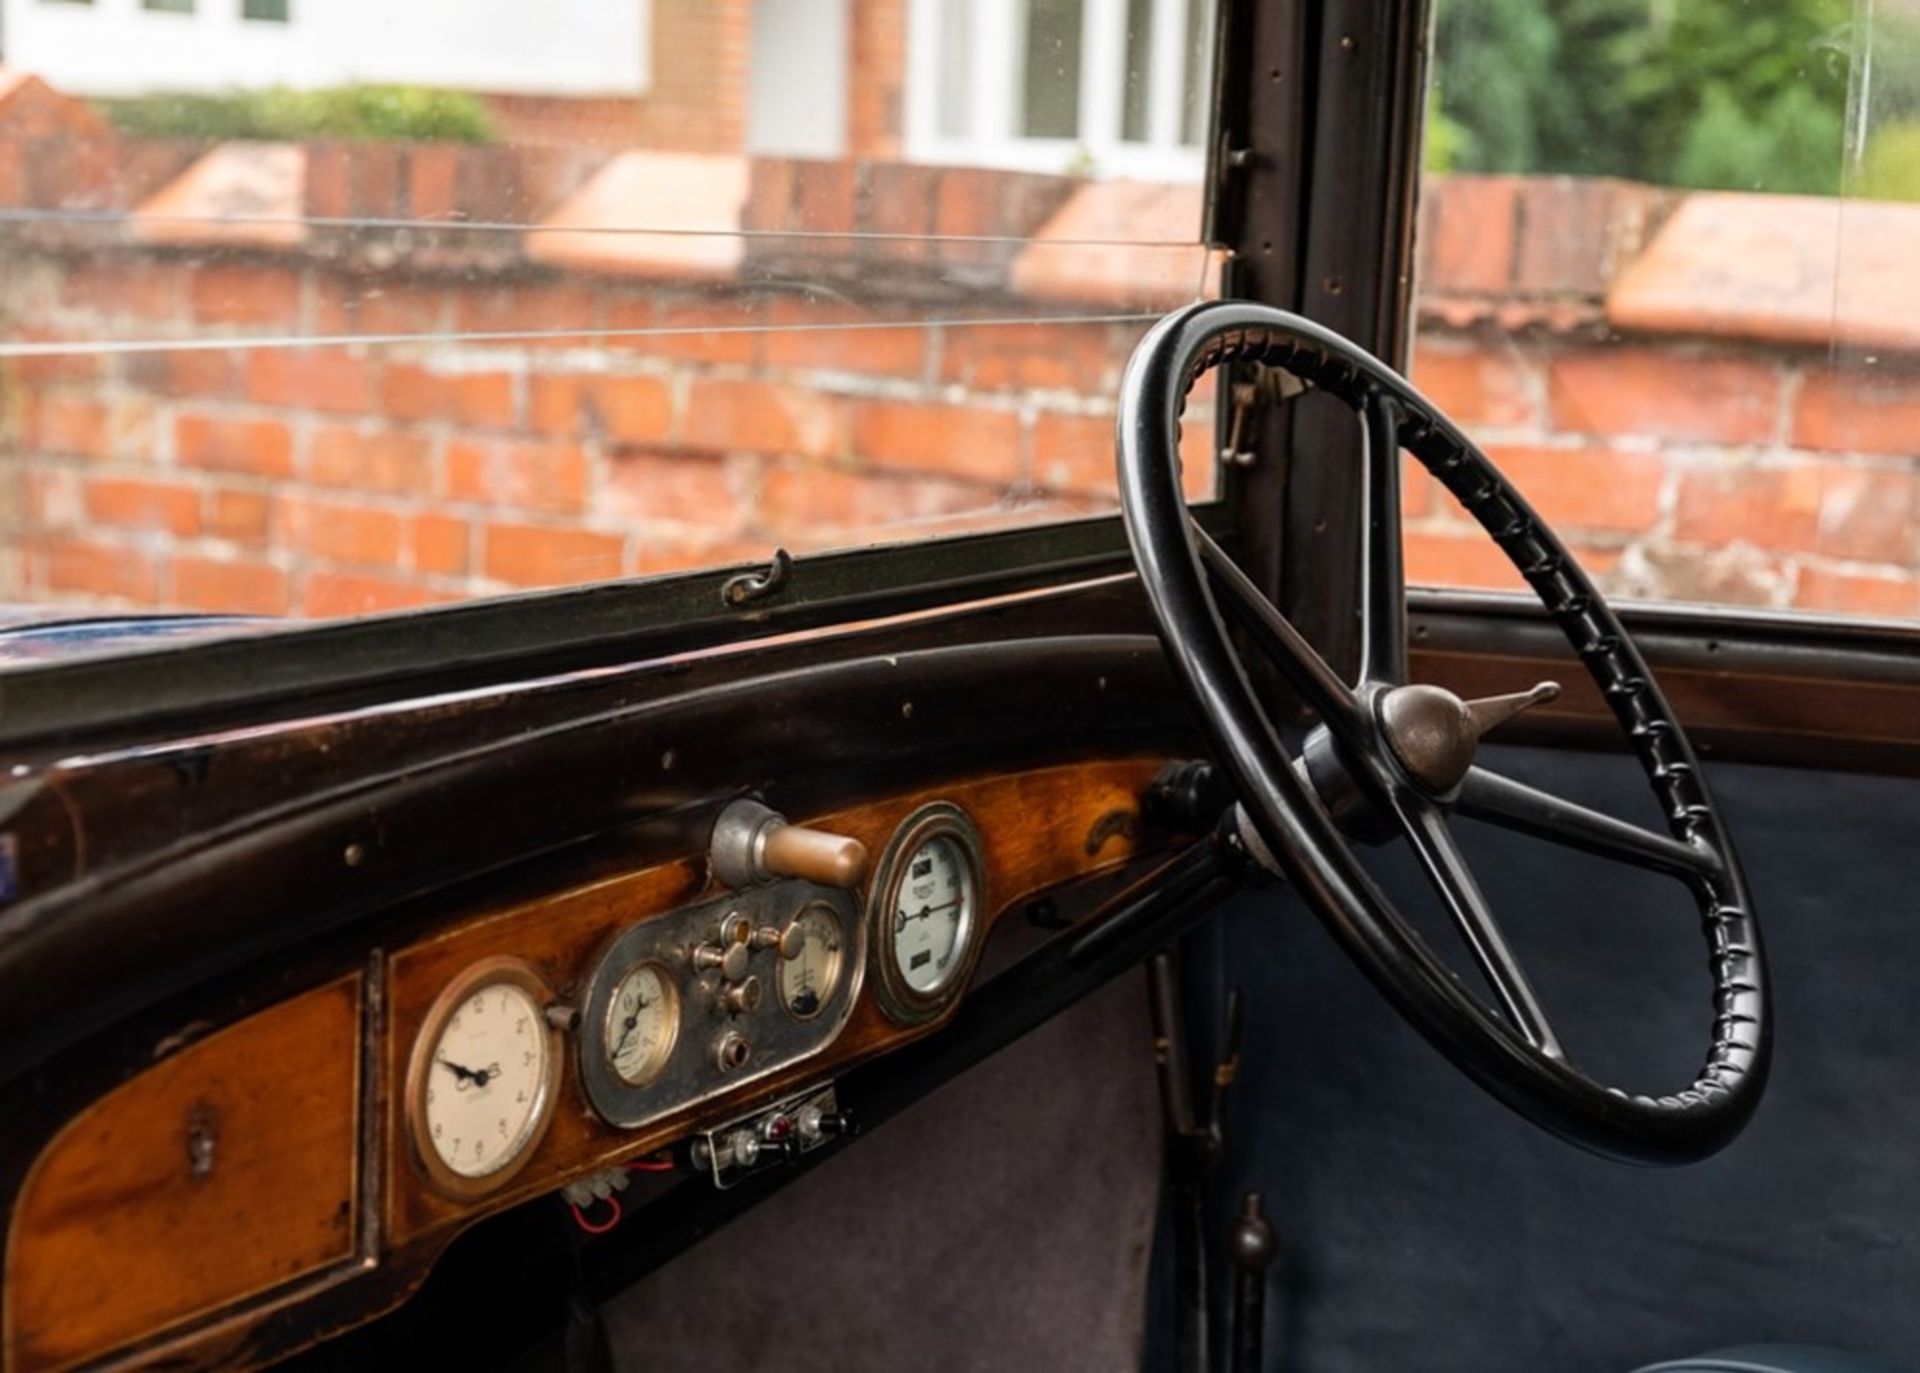 1925 Fiat 501 Saloon - Image 7 of 9